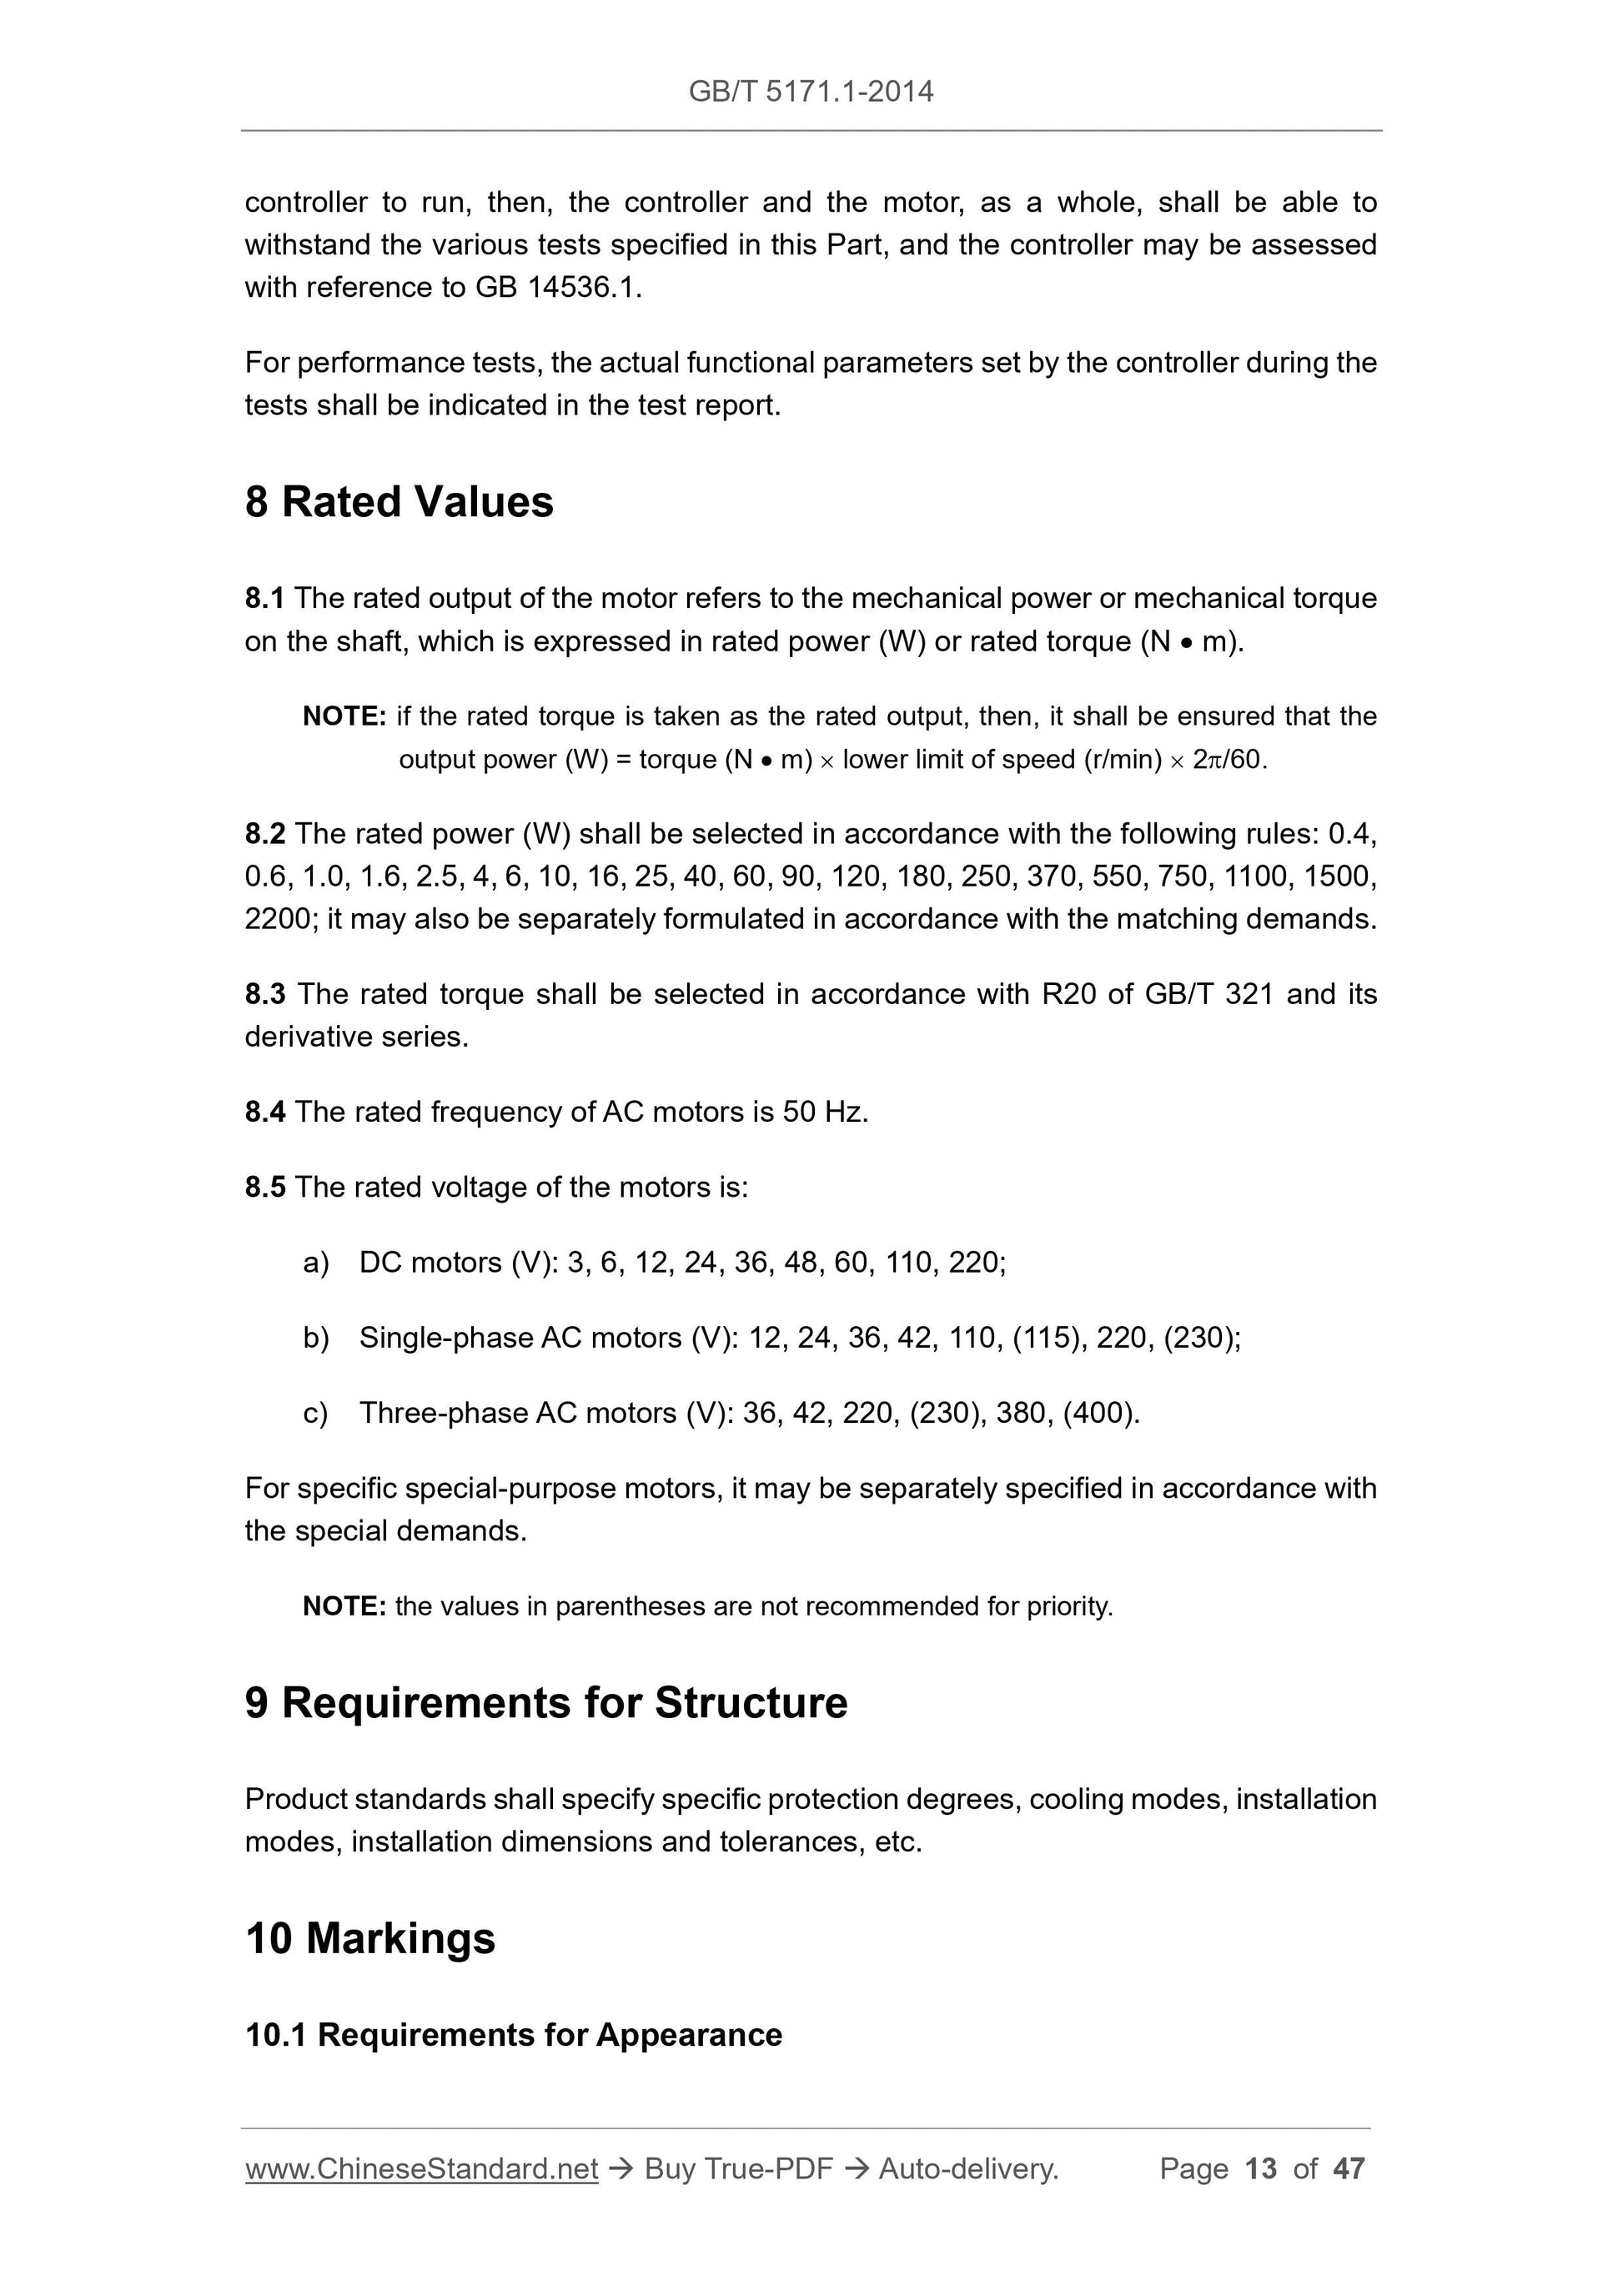 GB/T 5171.1-2014 Page 7